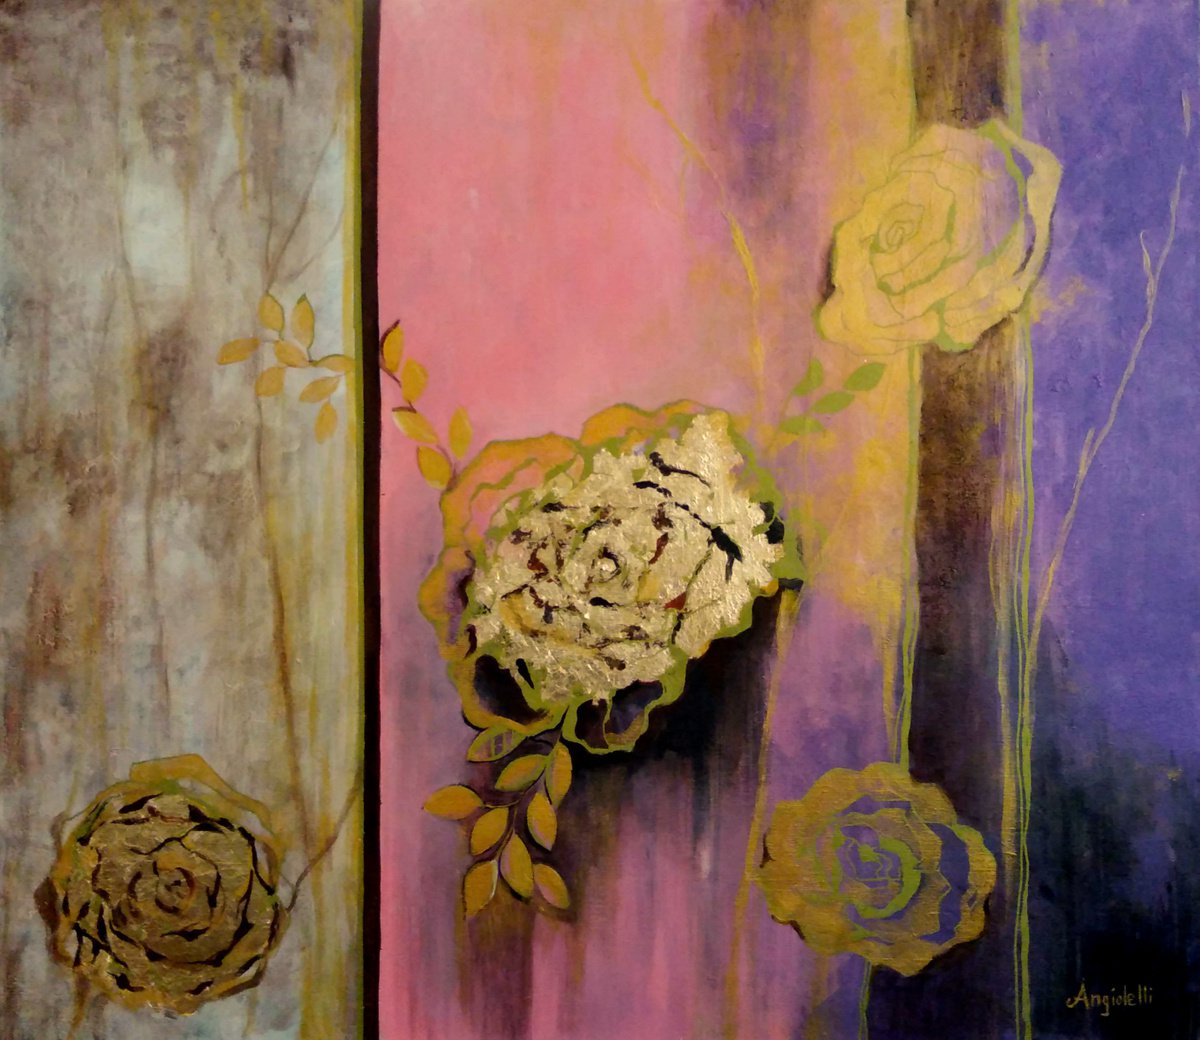 Golden roses - original painting-abstract painting by Anna Rita Angiolelli